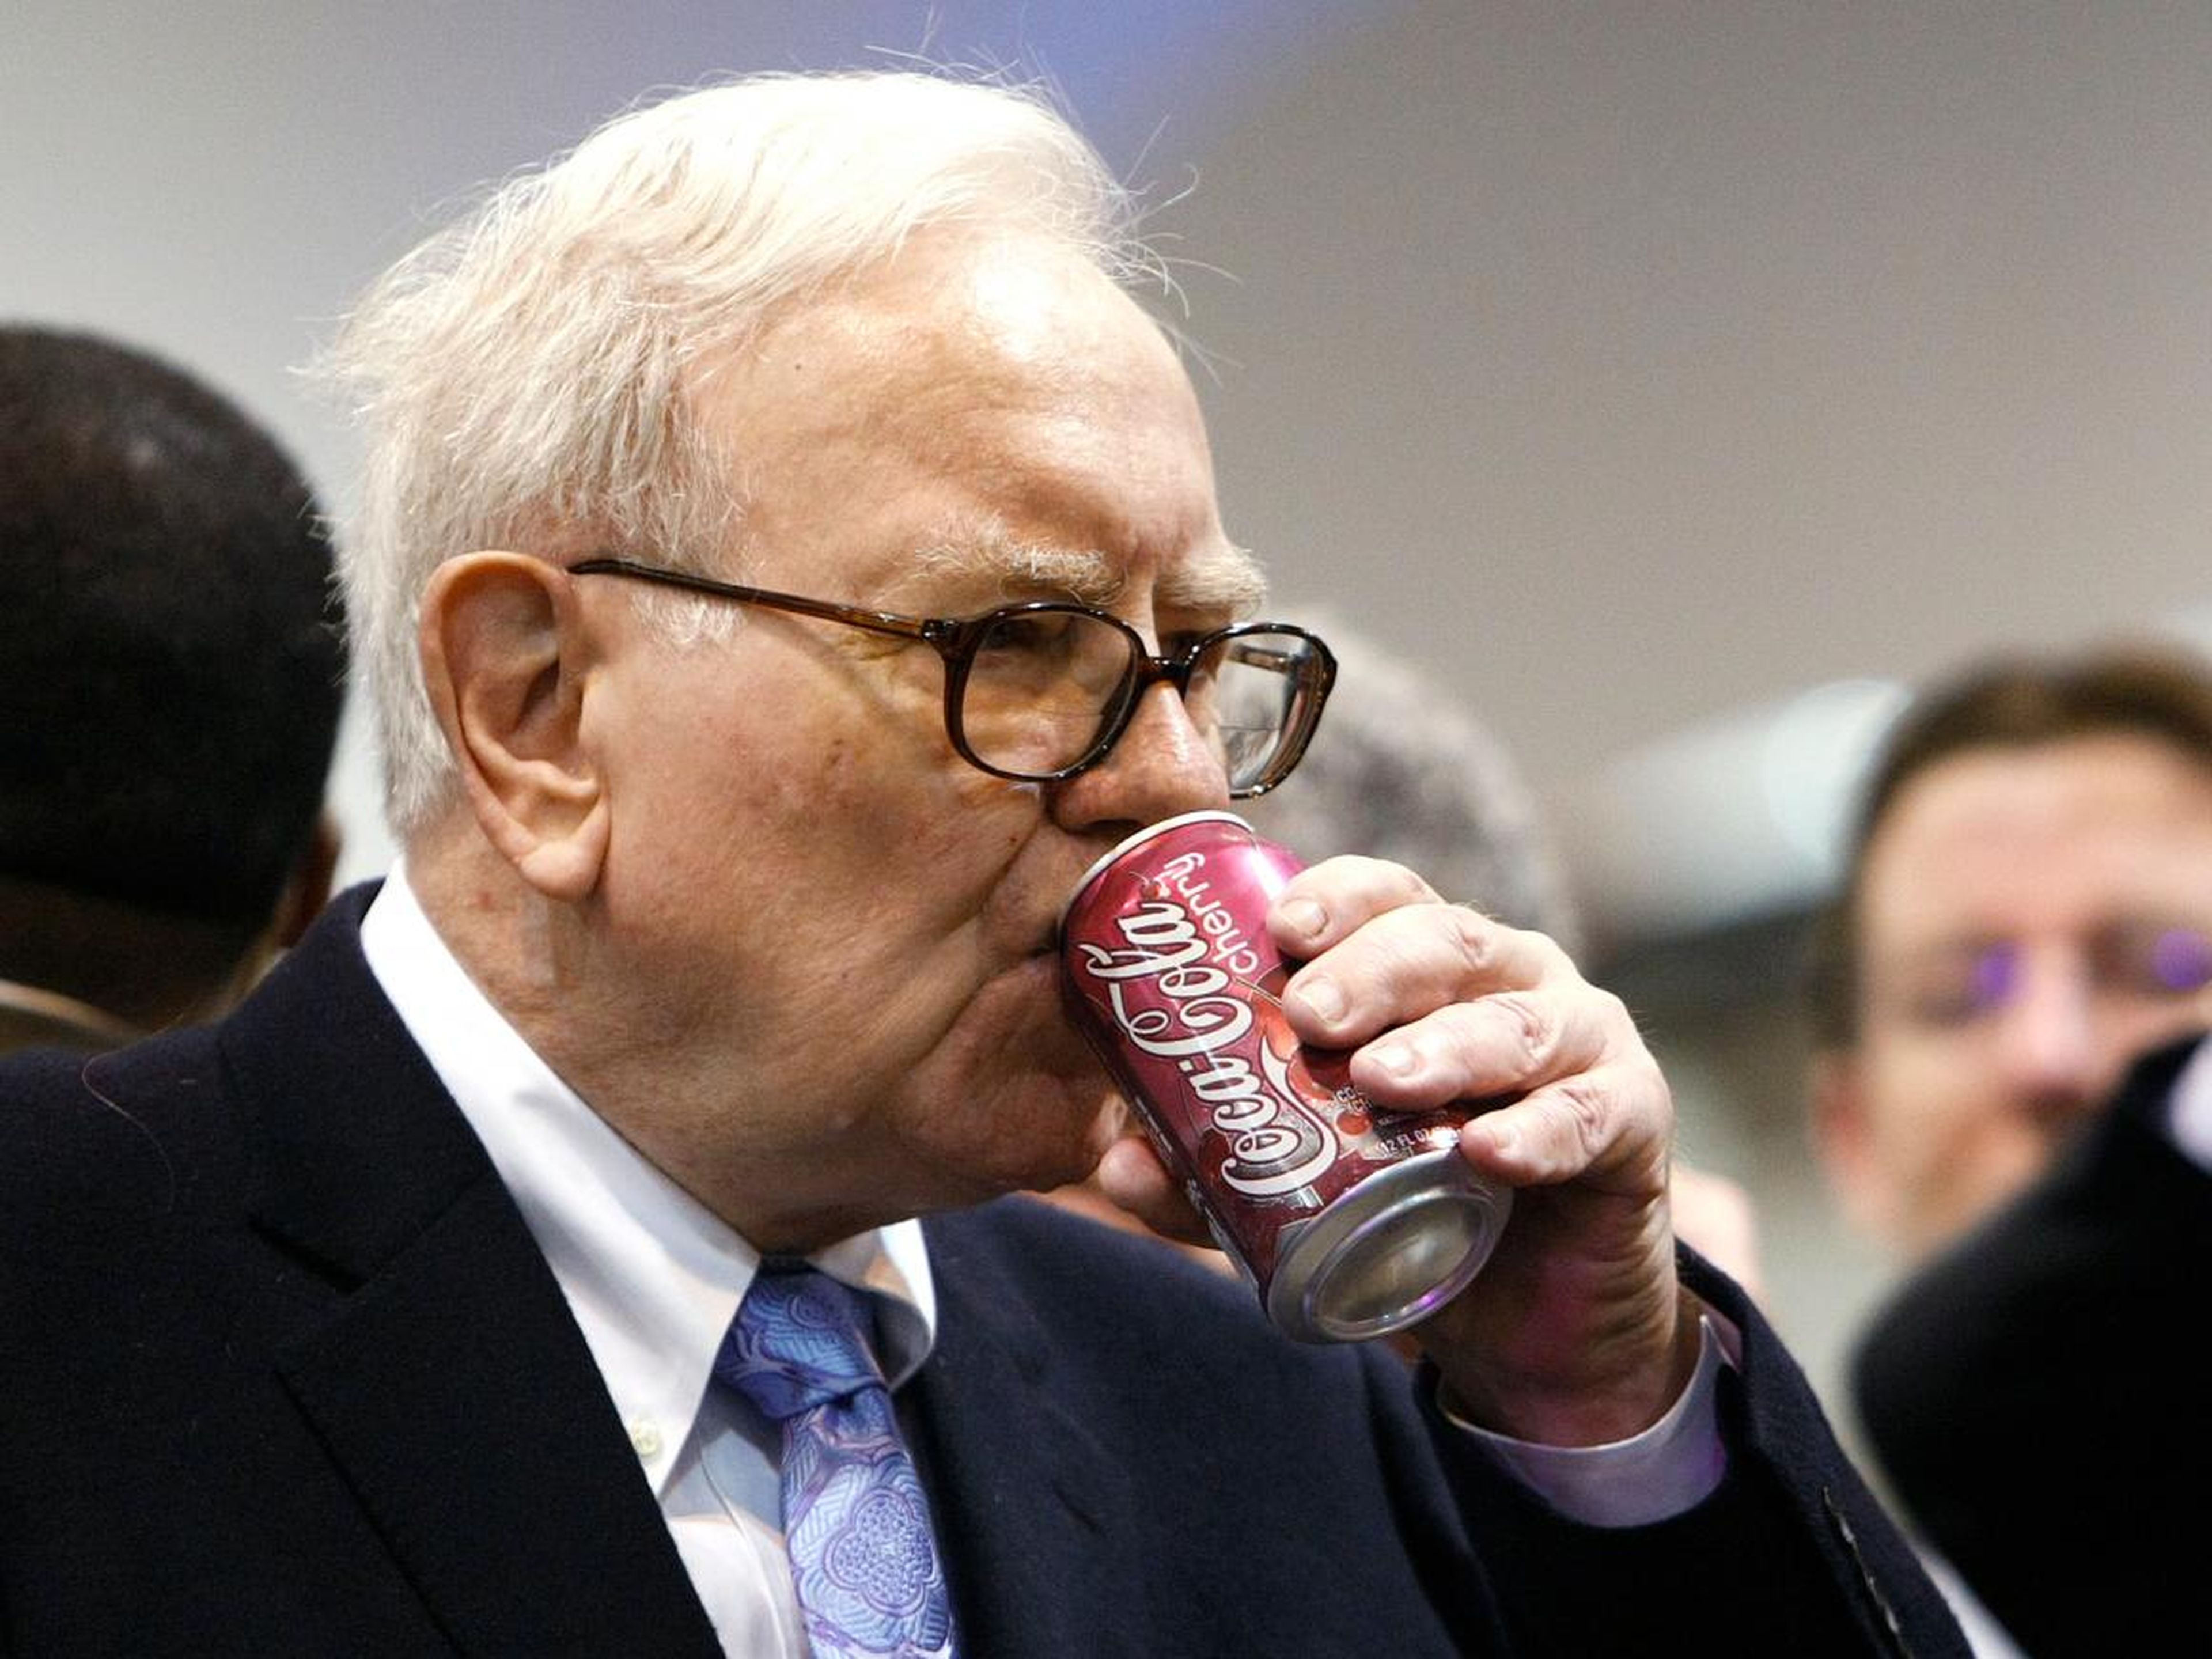 Buffett is also a fan of Coca Cola; he has said he typically drinks five Cokes a day — so you can imagine he spends more on the beverage than the average person.